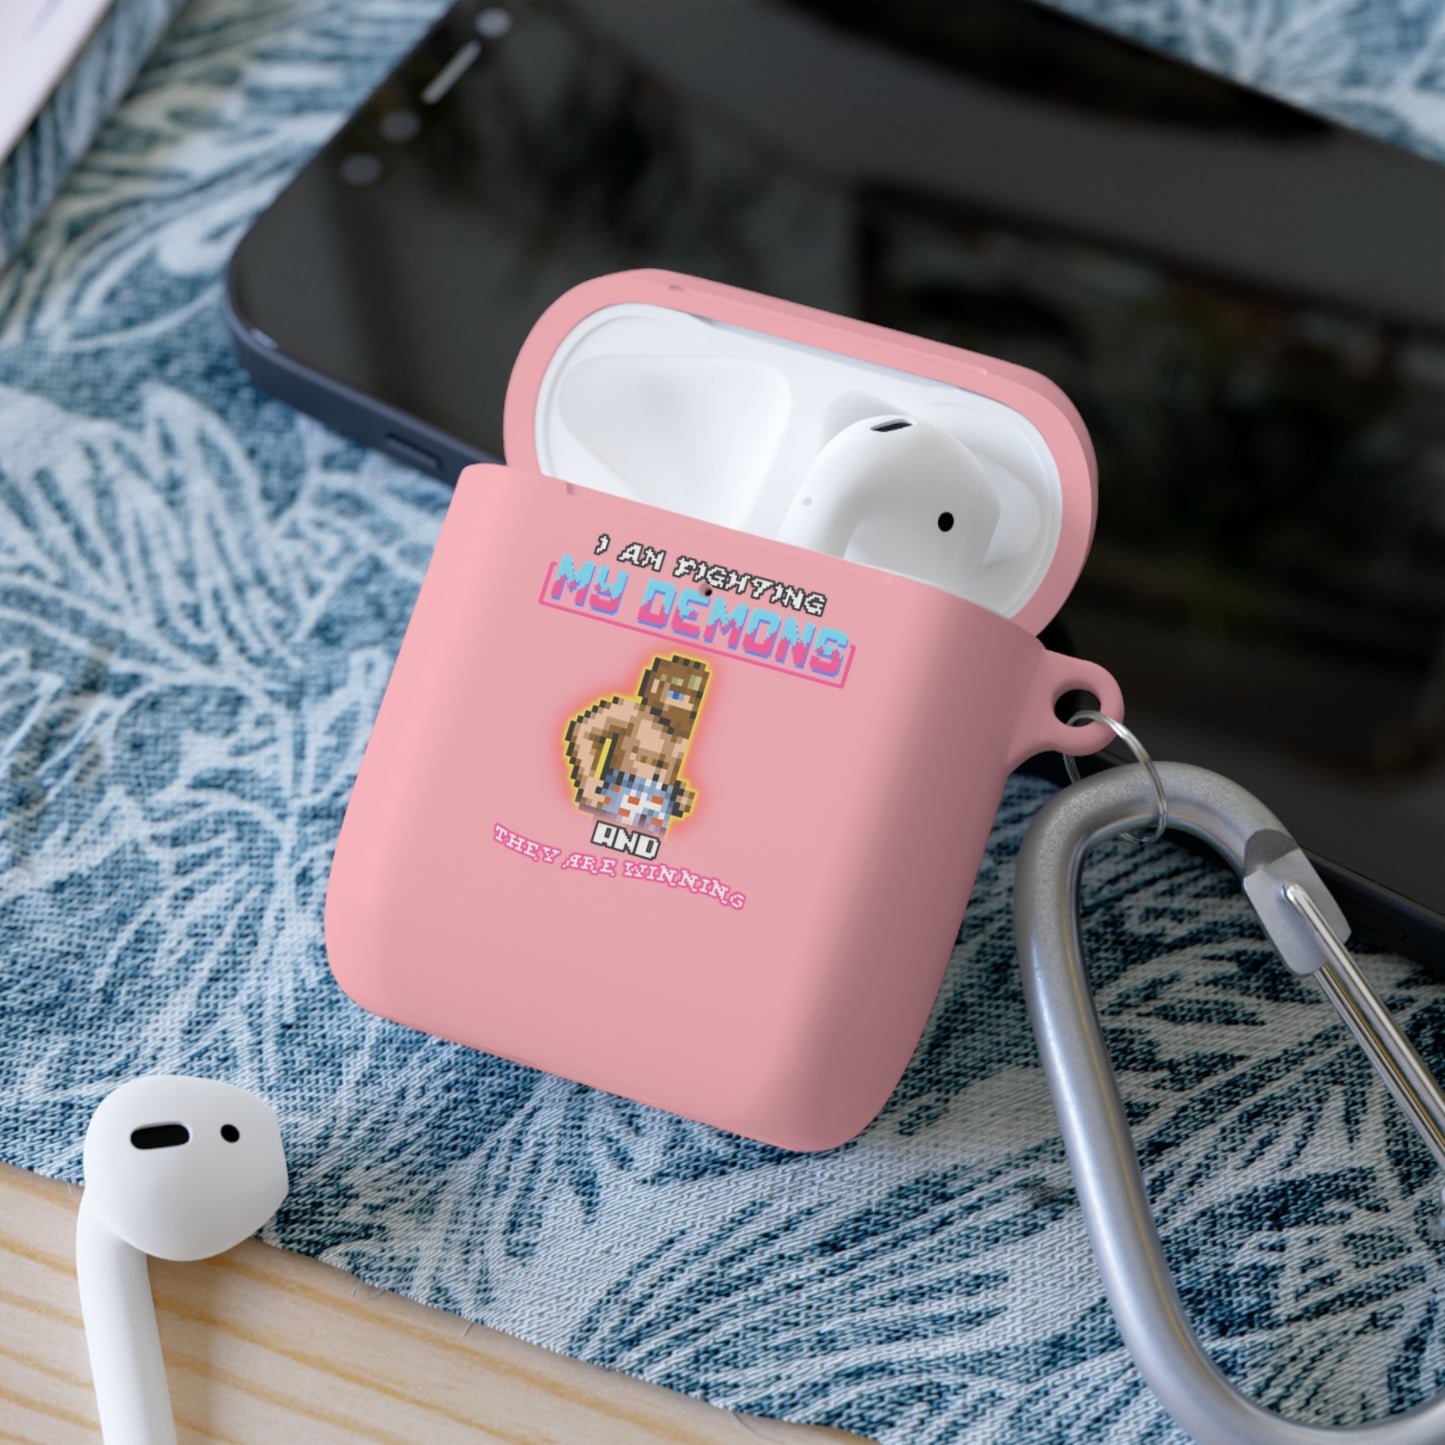 AirPods / AirPods Pro Case Cover - Fighting my demons